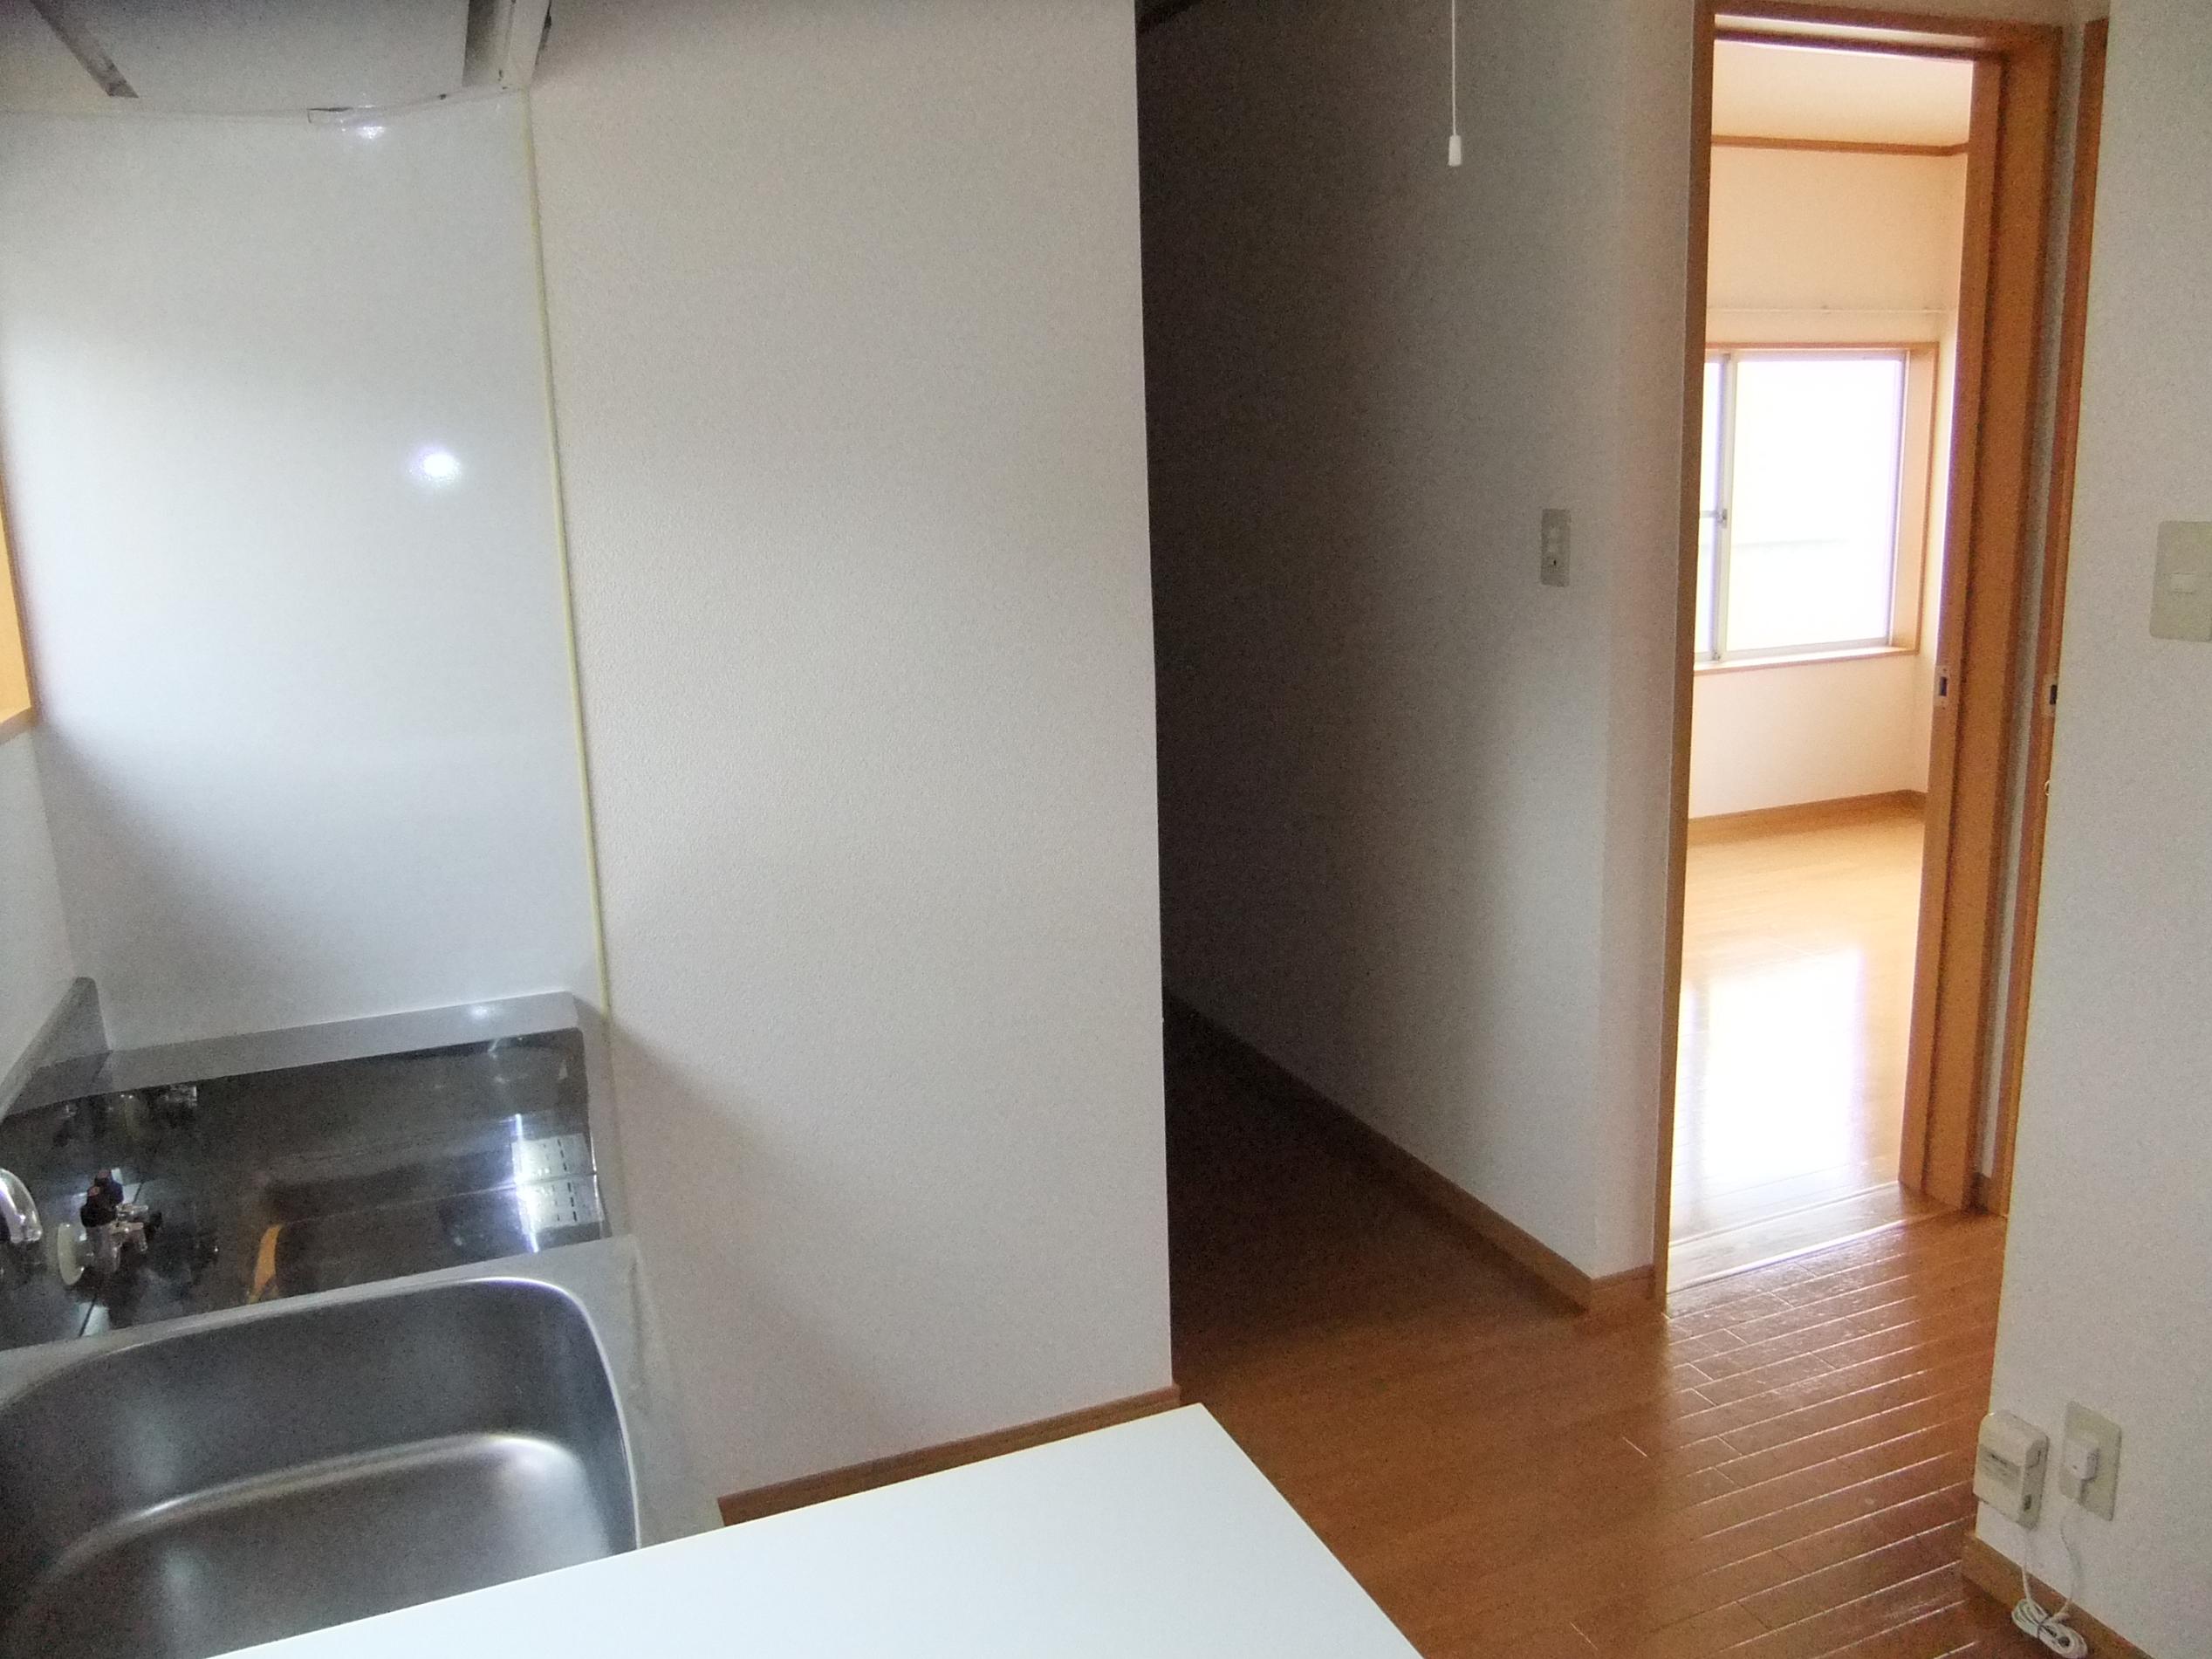 Kitchen. 6 Pledge Western-style entrance and toilet, bathroom, Is the passage of laundry to put